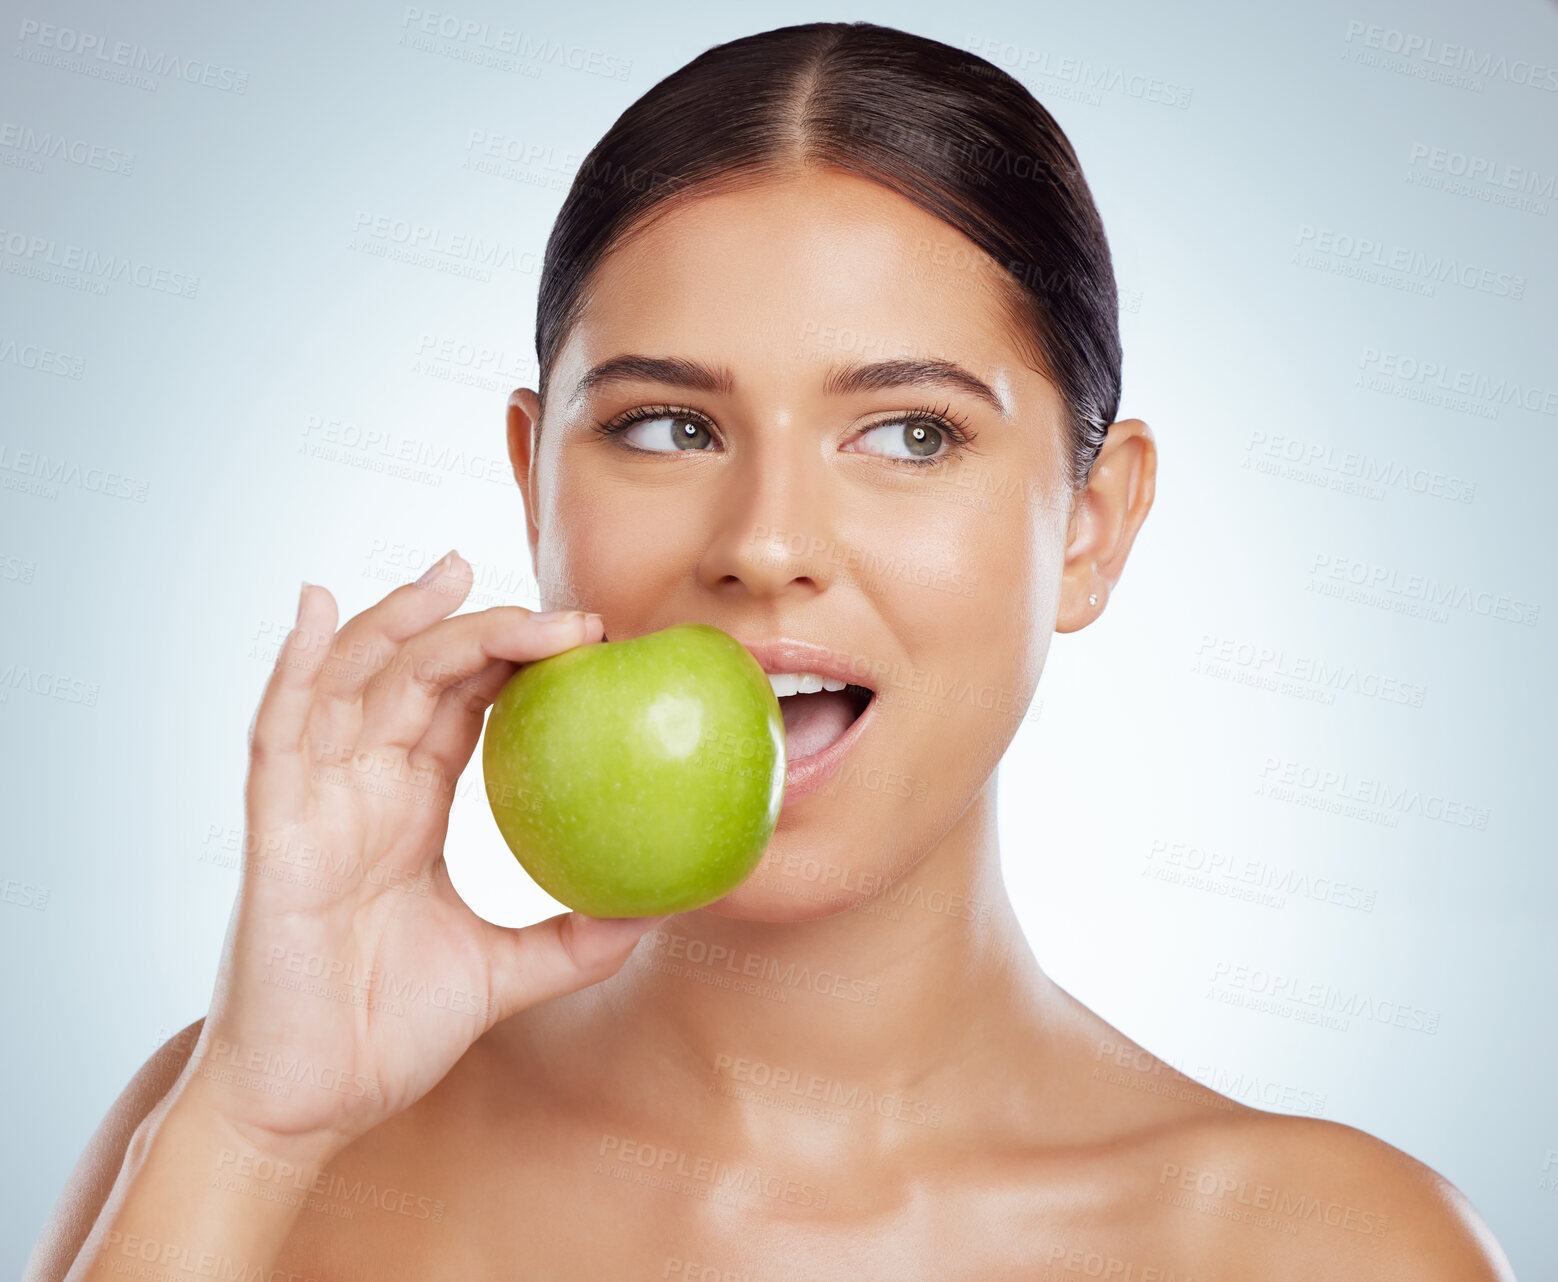 Buy stock photo Beautiful woman biting into a green apple while posing with copypsace. Caucasian model looking contemplative while isolated against a grey studio background. Eating healthy is part of skincare routine